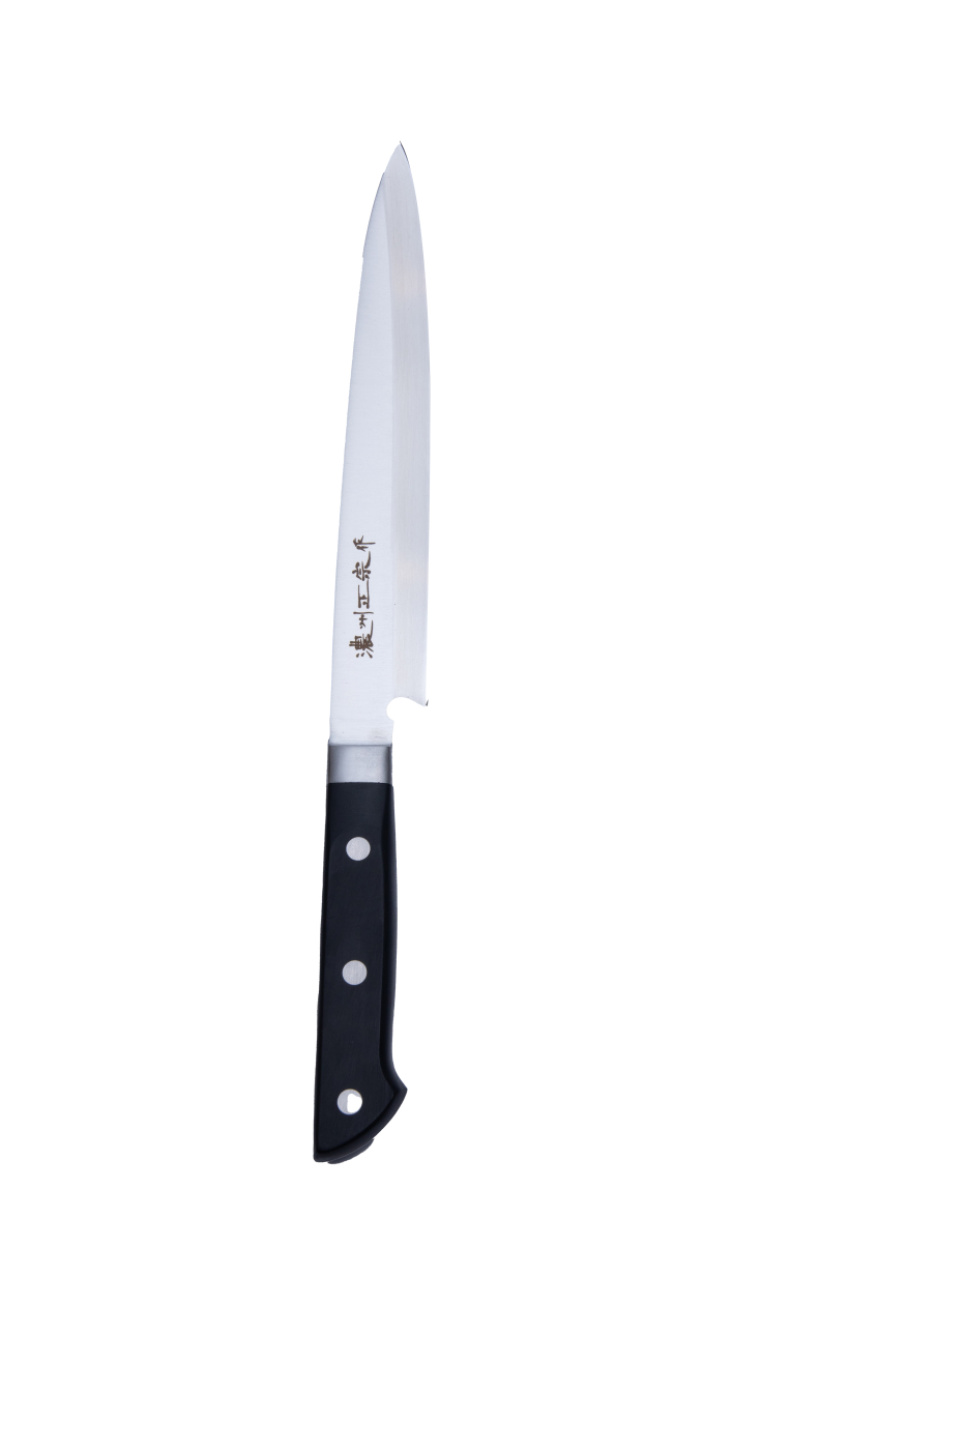 Yanagiba 21cm - Pro House in the group Cooking / Kitchen knives / Sashimi knives at KitchenLab (1450-27647)